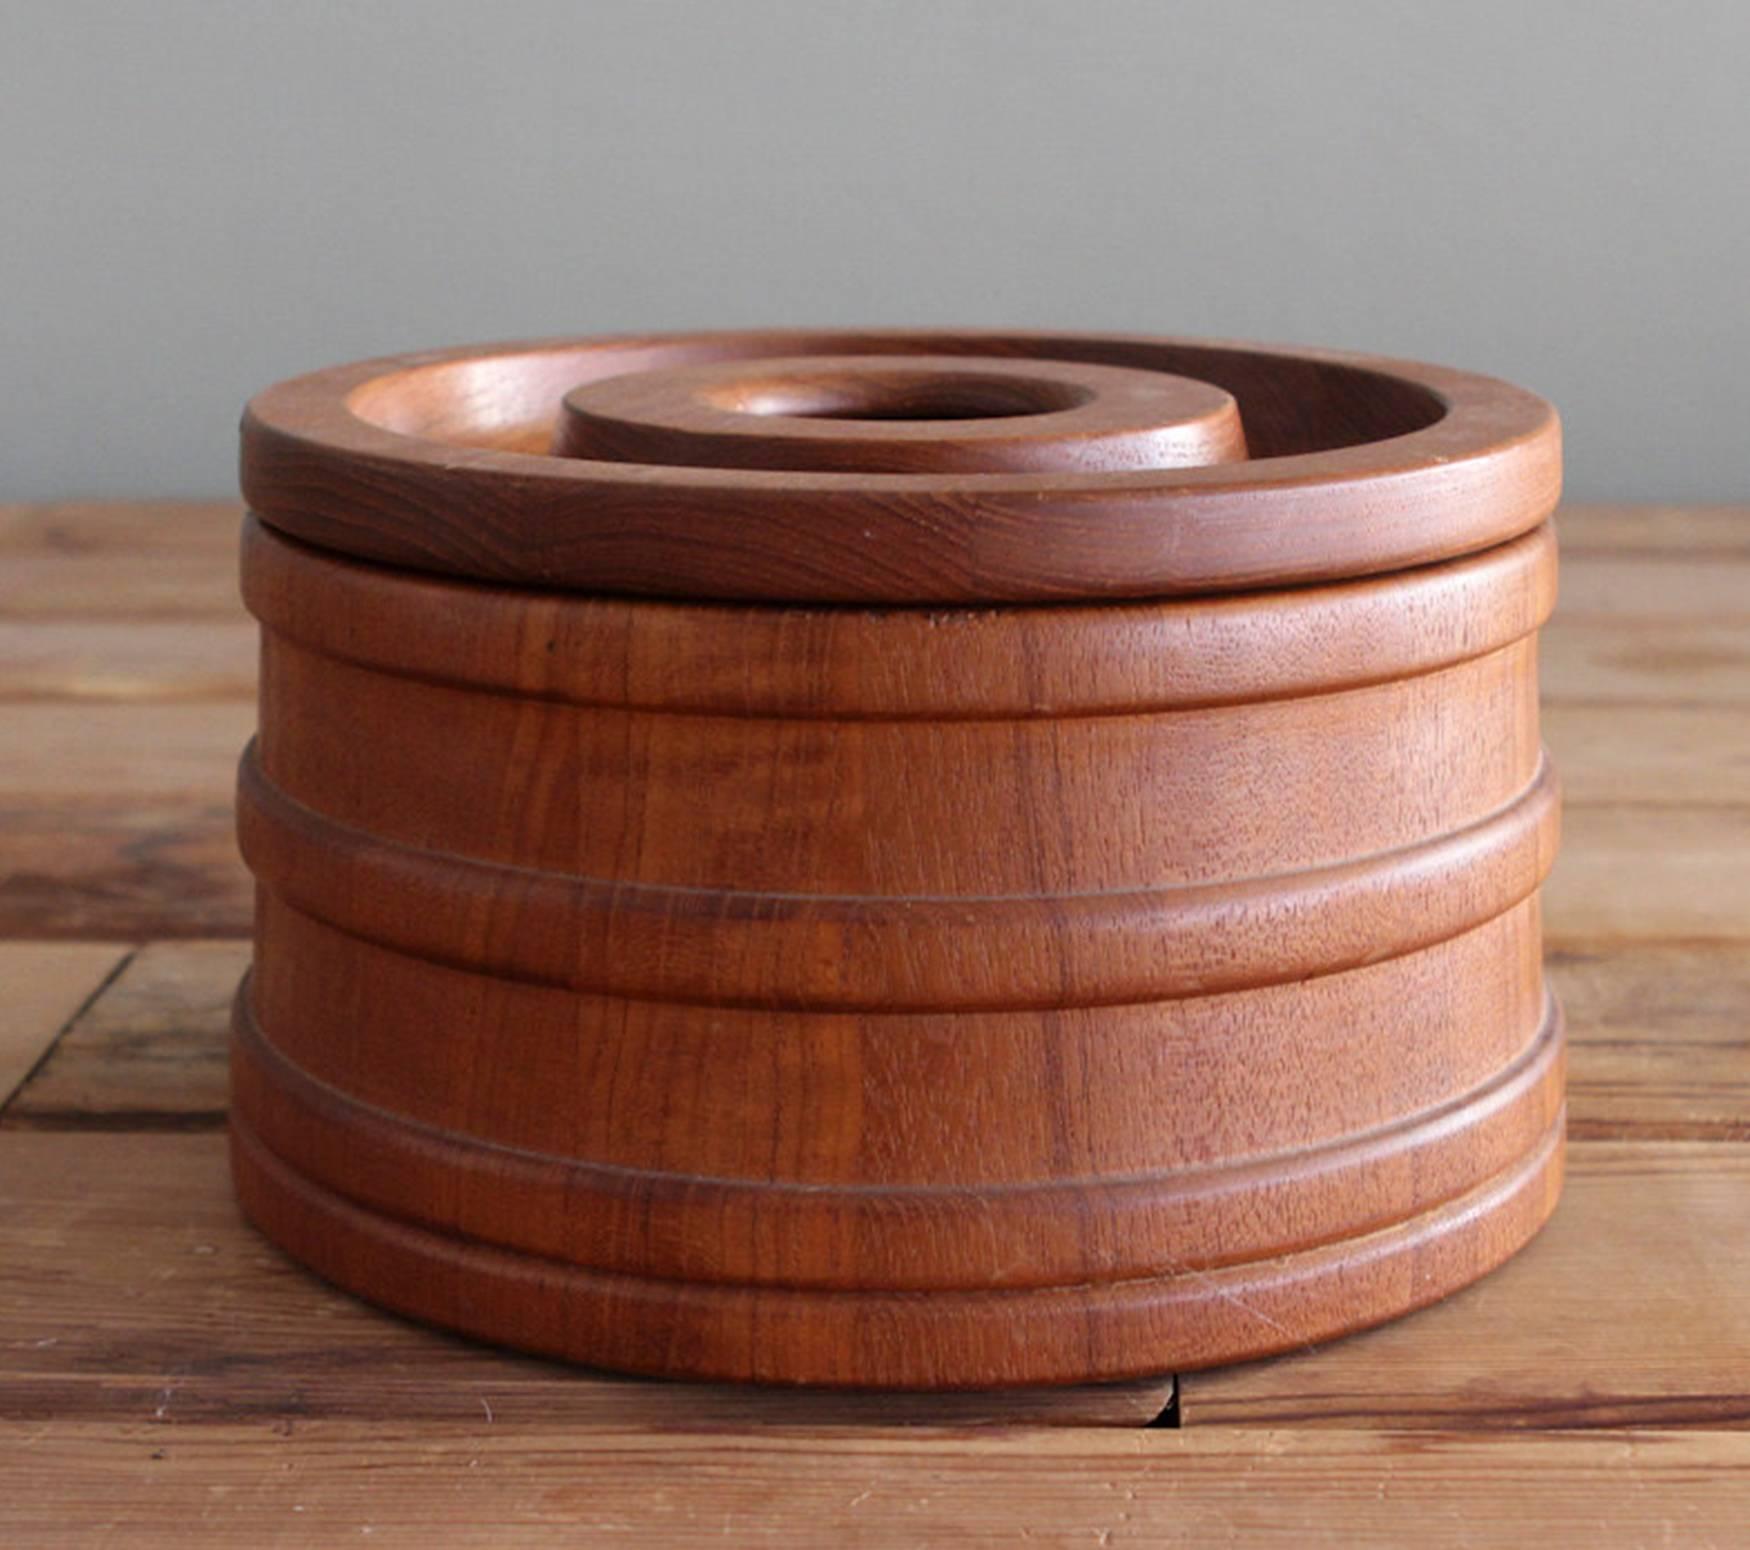 This staved teak lidded ice bucket was designed by Jens Quistgaard for Dansk. The container is a slightly tapered cylinder banded with rings and the lid has an integral handle. Retains its original black plastic liner

Measures 5 1/4 inches high